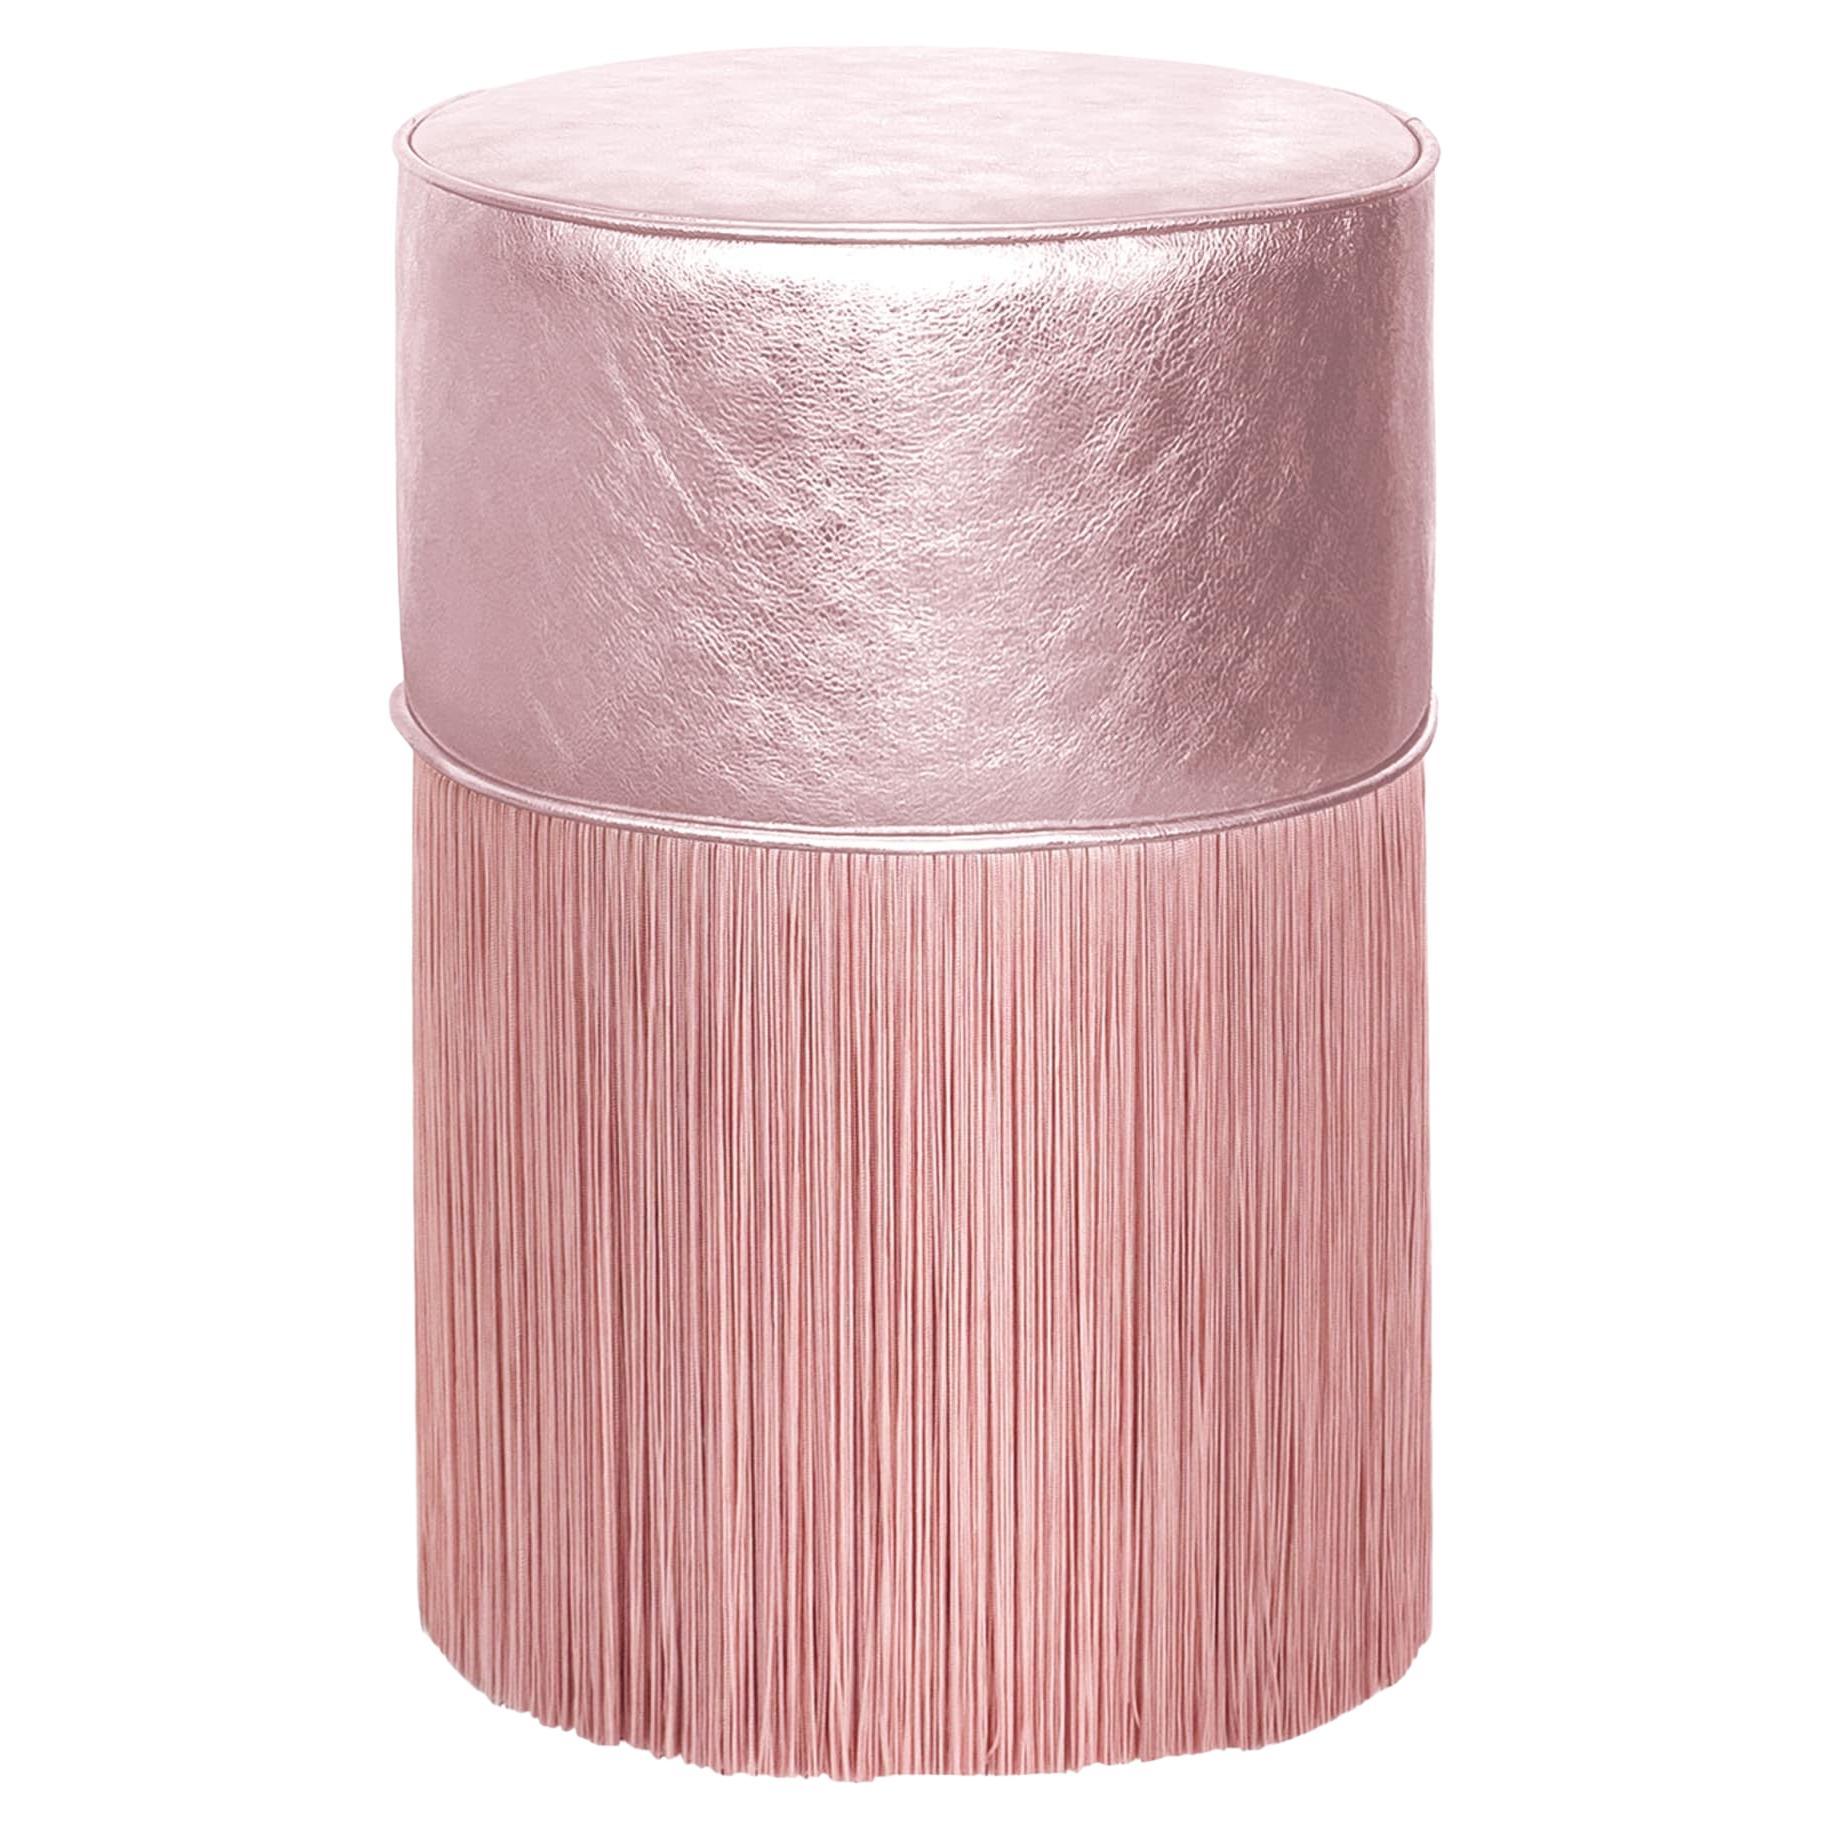 Gleaming Light Pink Metallic Leather Pouf by Lorenza Bozzoli For Sale